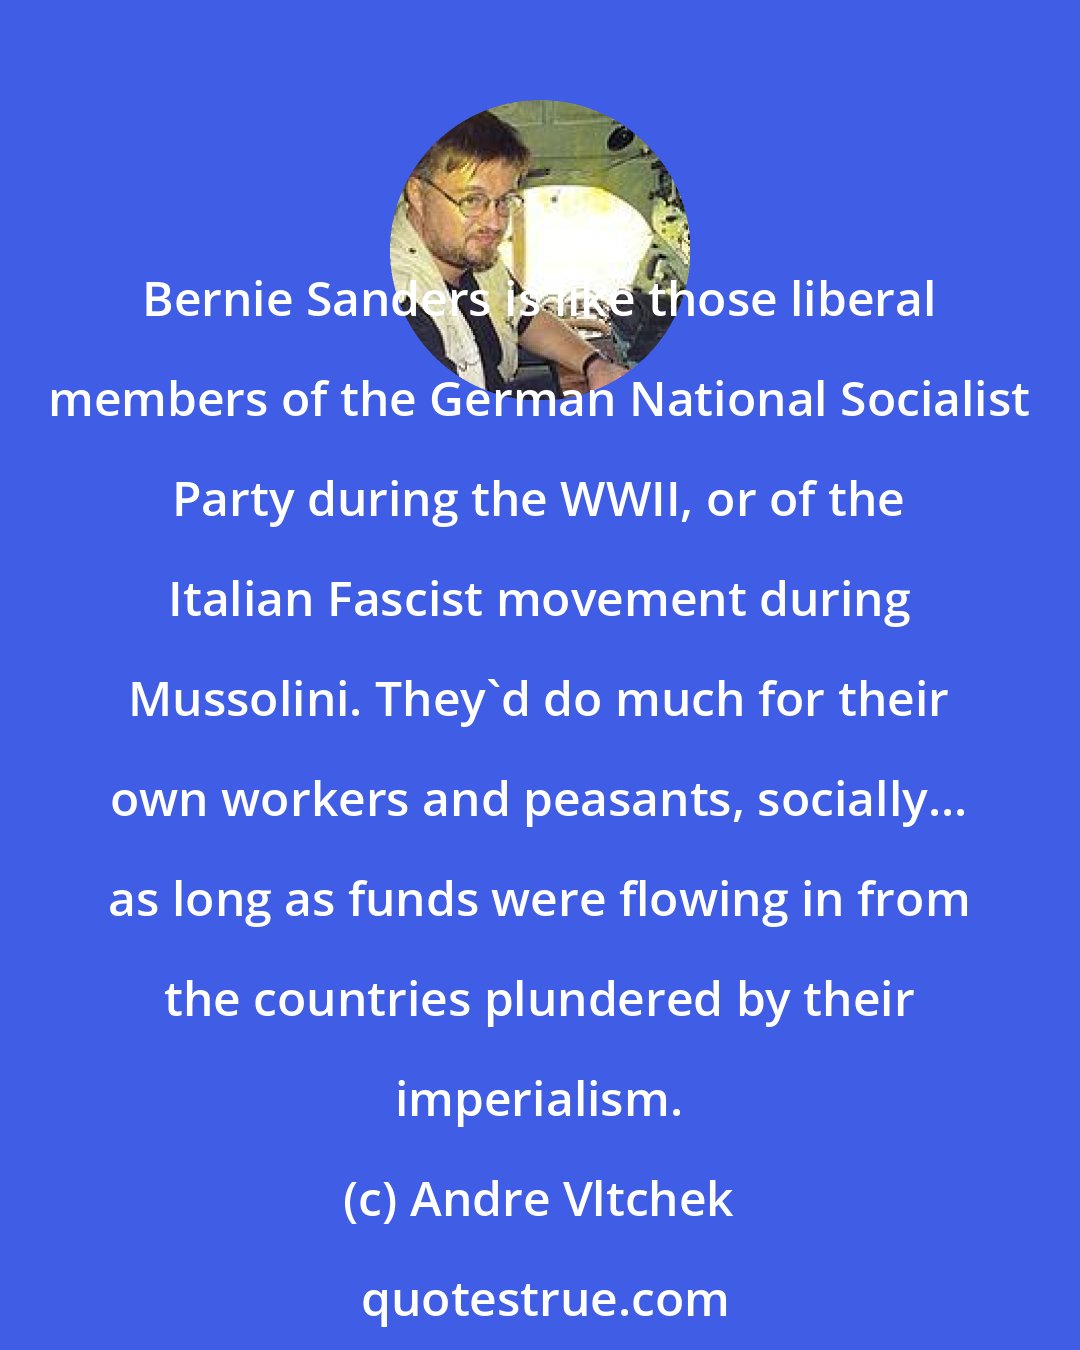 Andre Vltchek: Bernie Sanders is like those liberal members of the German National Socialist Party during the WWII, or of the Italian Fascist movement during Mussolini. They'd do much for their own workers and peasants, socially... as long as funds were flowing in from the countries plundered by their imperialism.